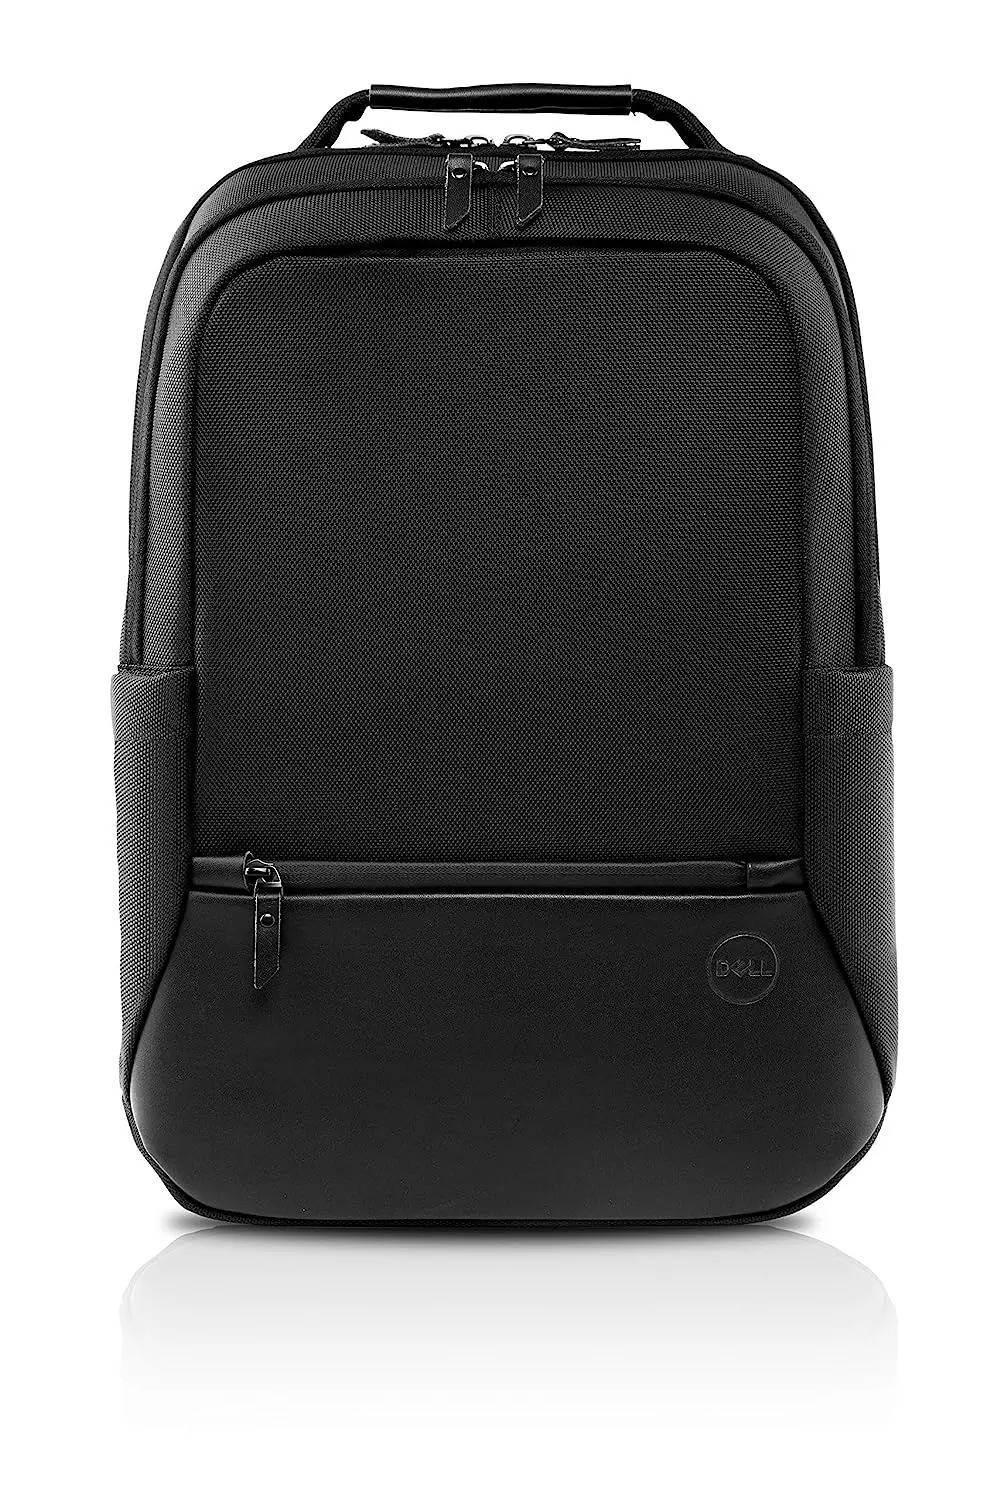 Buy Black Customized Dell Laptop Bag | yourPrint